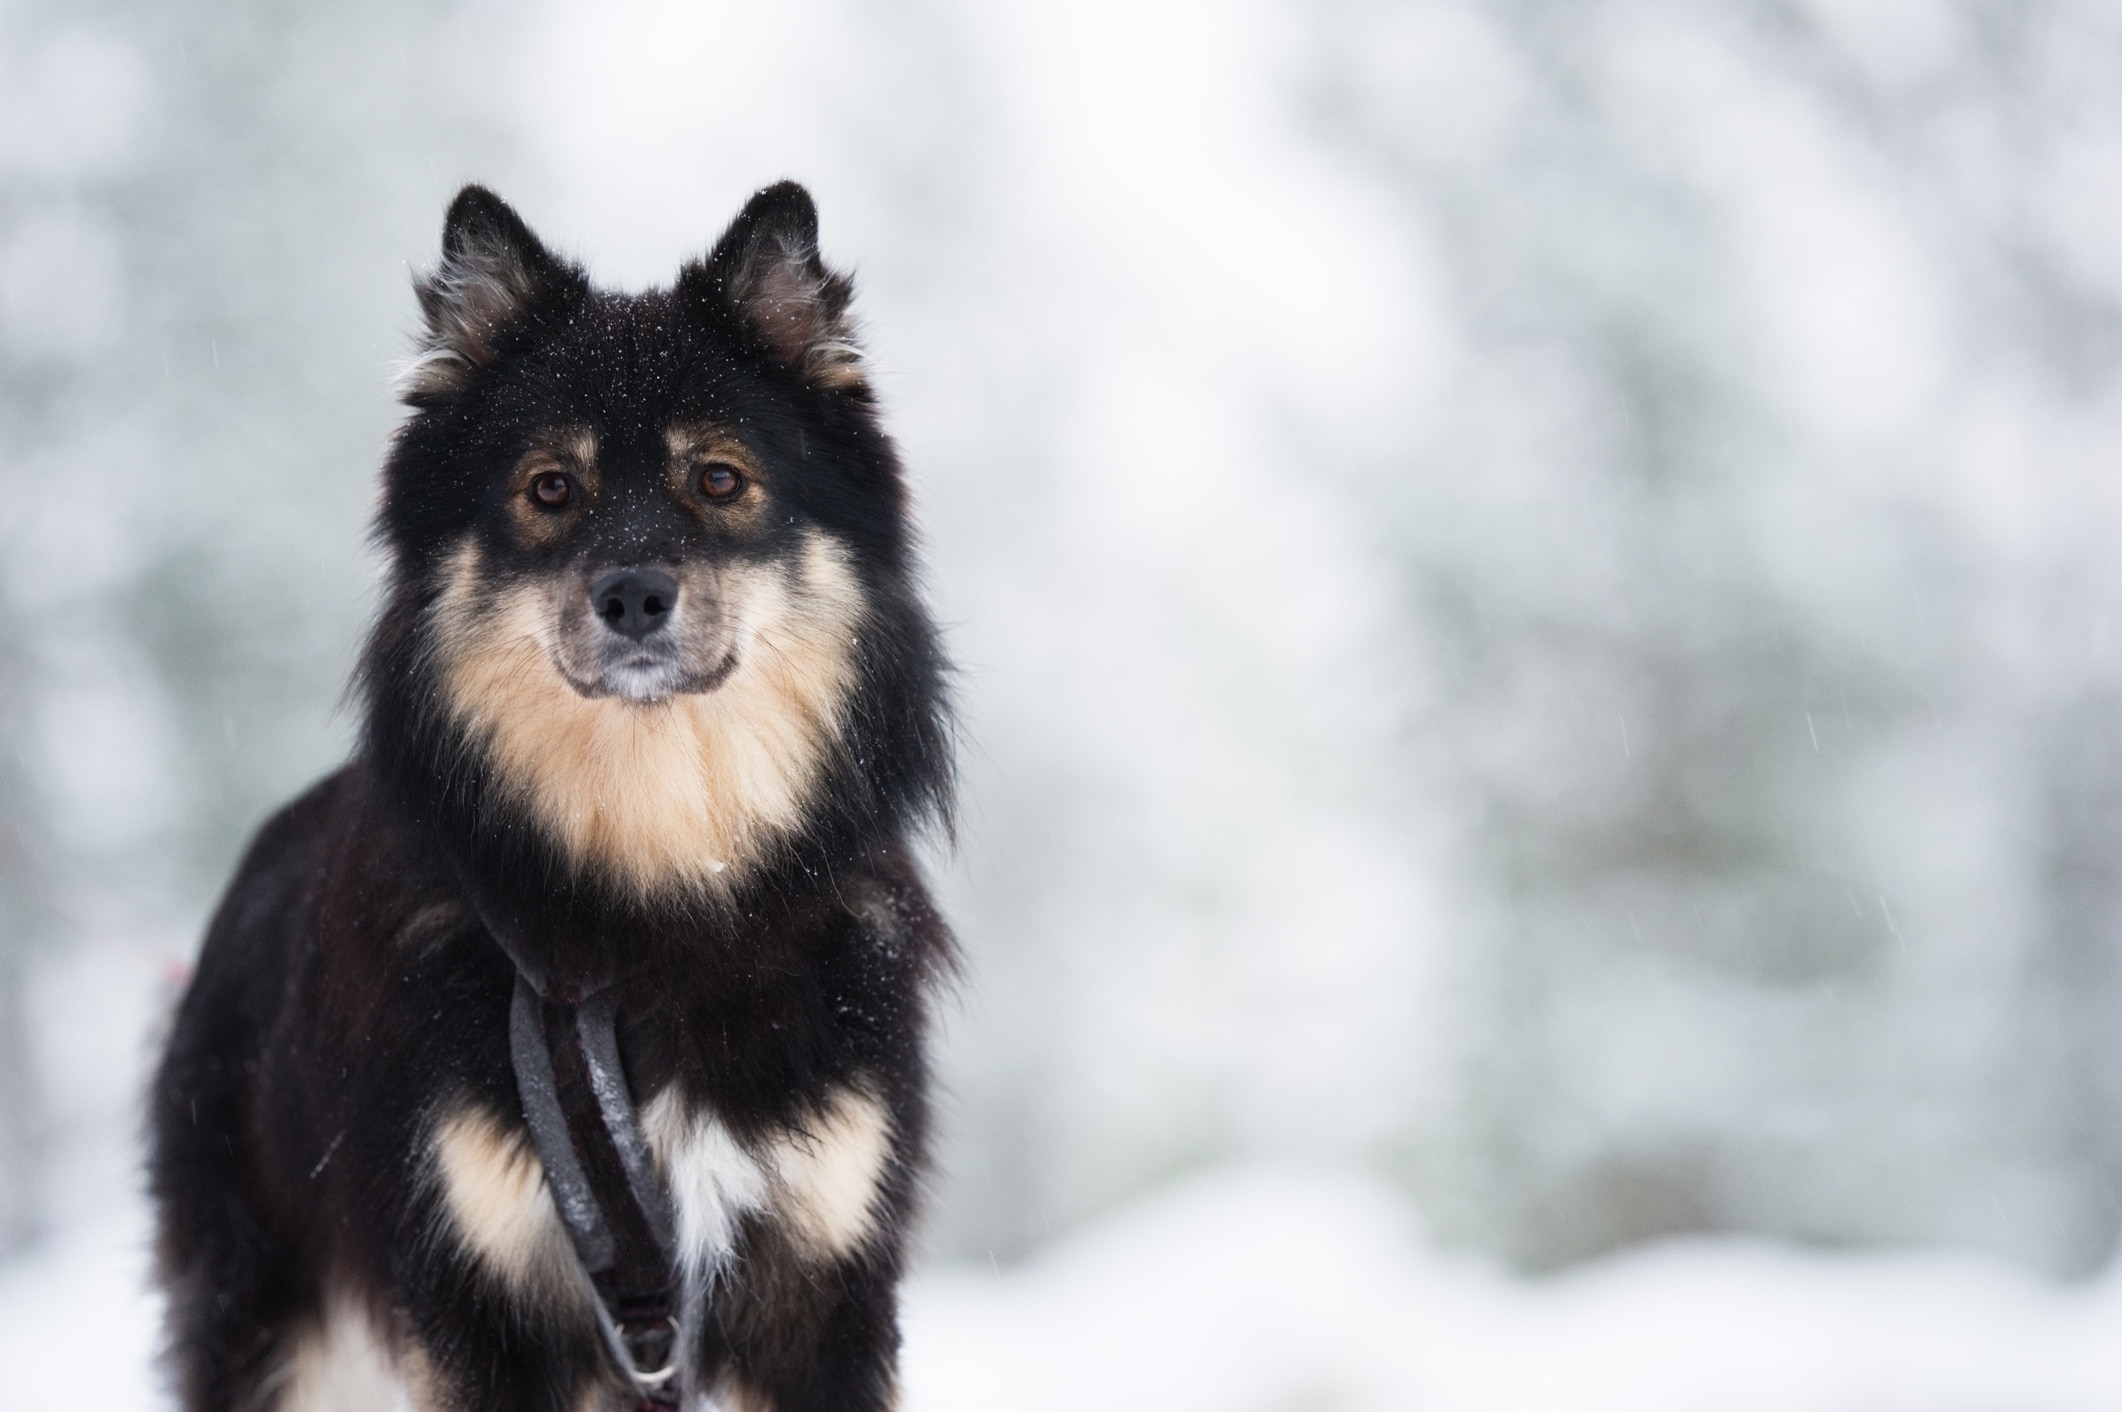 Black and tan Finnish Lapphund dog standing in the snow.